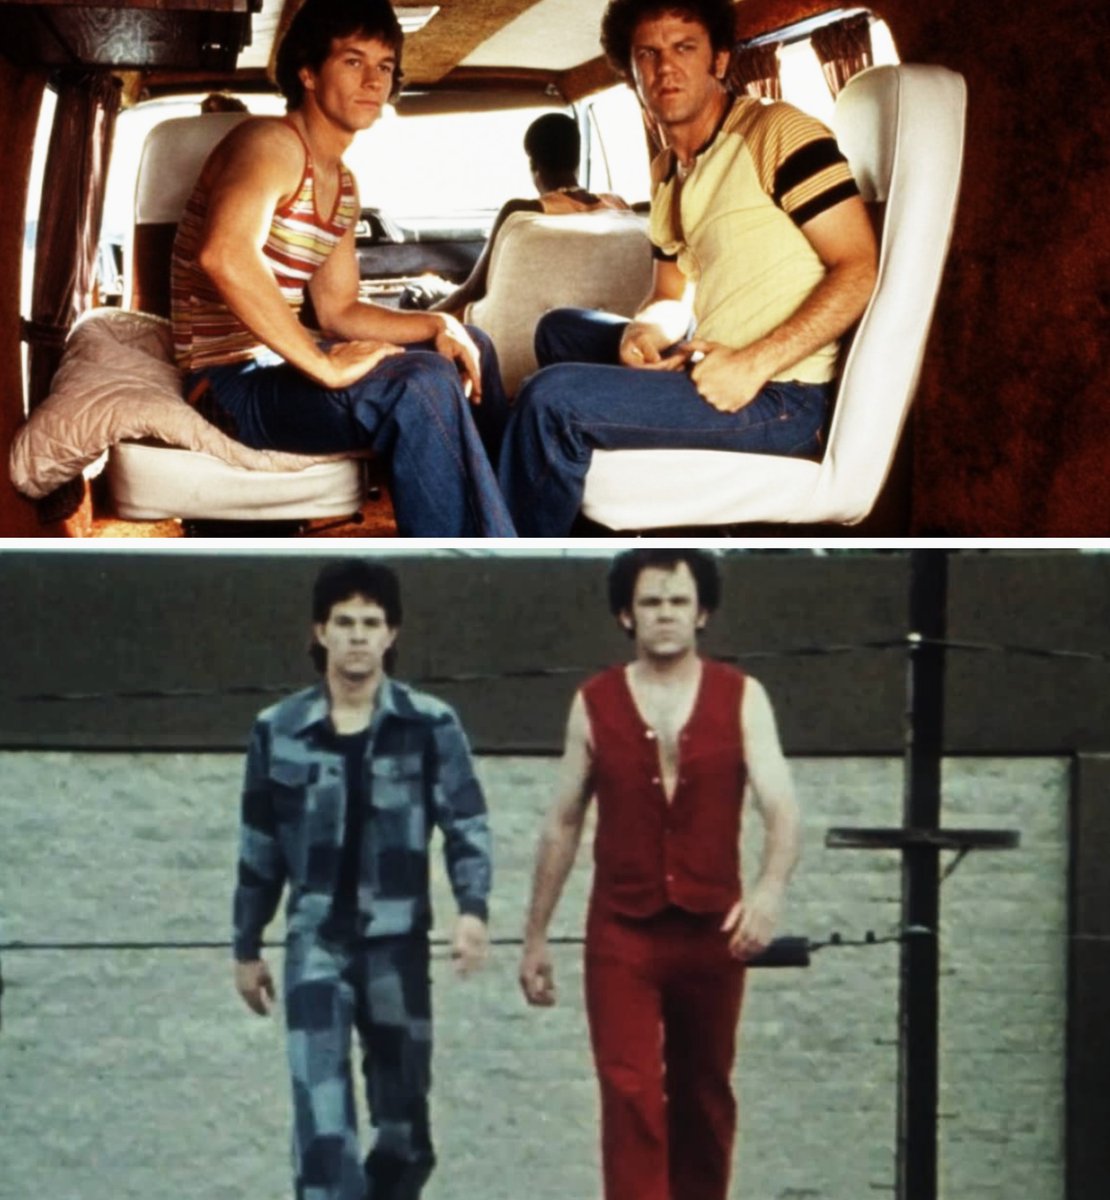 #Bales2023FilmChallenge #FilmTwitter #NowWatching Day 26 - Someone Wearing Jeans In Movie #BoogieNights (1997) Mark Wahlberg is Dirk Diggler and John C. Reilly is Reed Rothchild. They're porn stars from the late 1970's. They're soon to be Chest and Brock in Brock Landers.